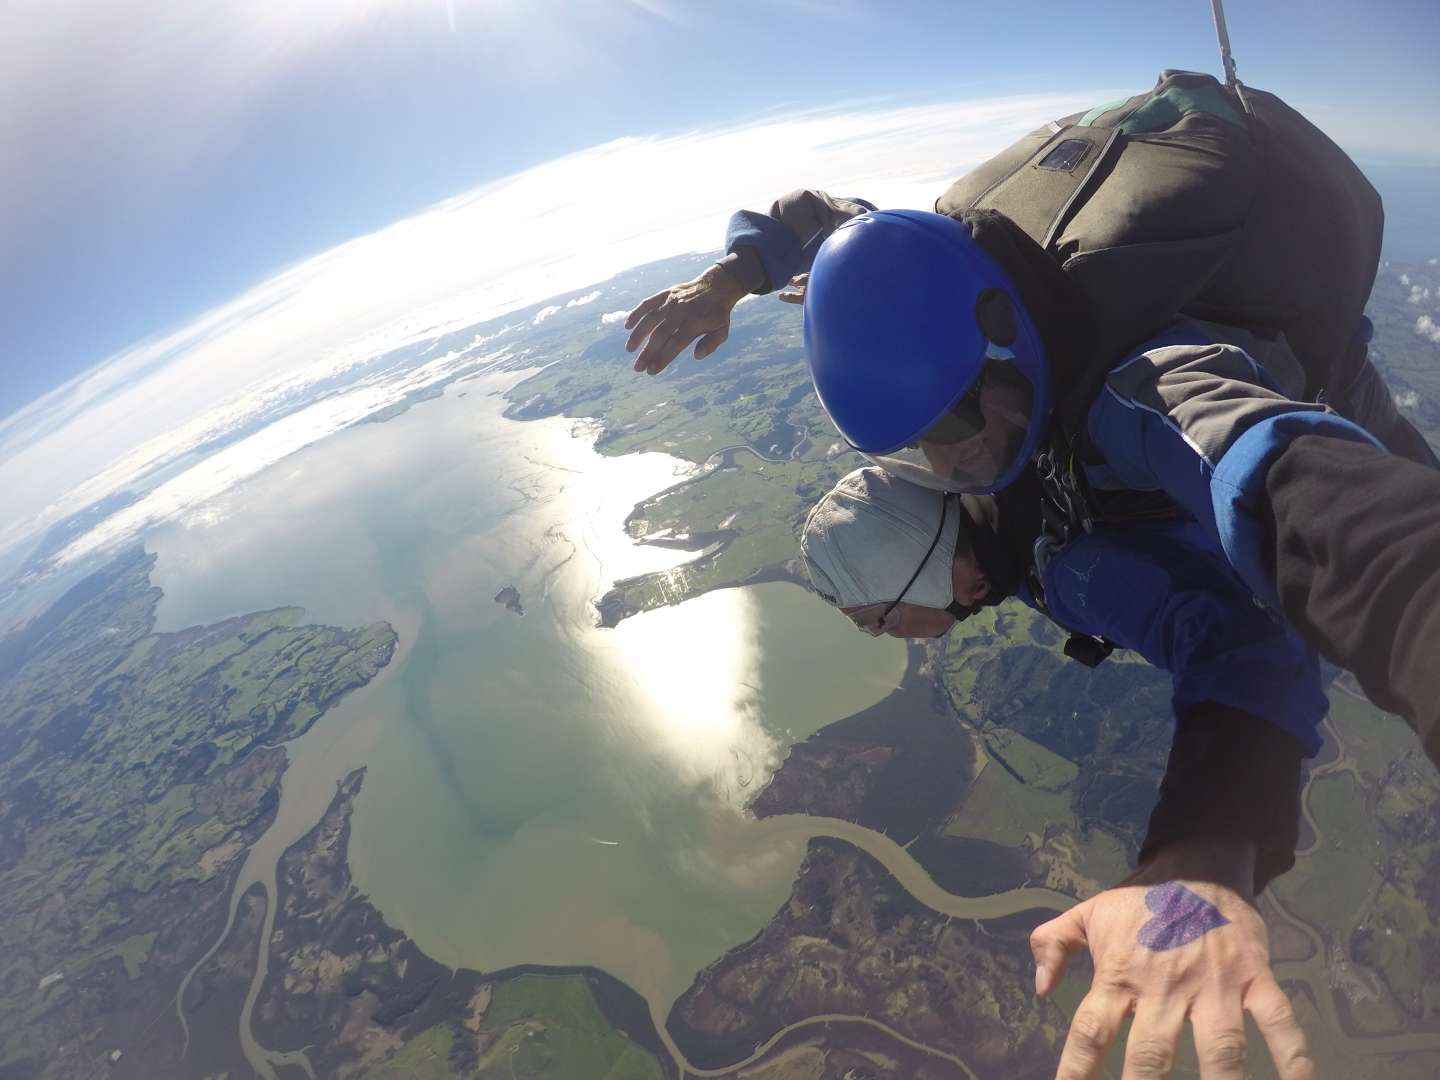 Skydive Auckland with Stunning views of both east & west coasts of NZ, Waiheke Island, Great Barrier Island & Mt Ruapehu.